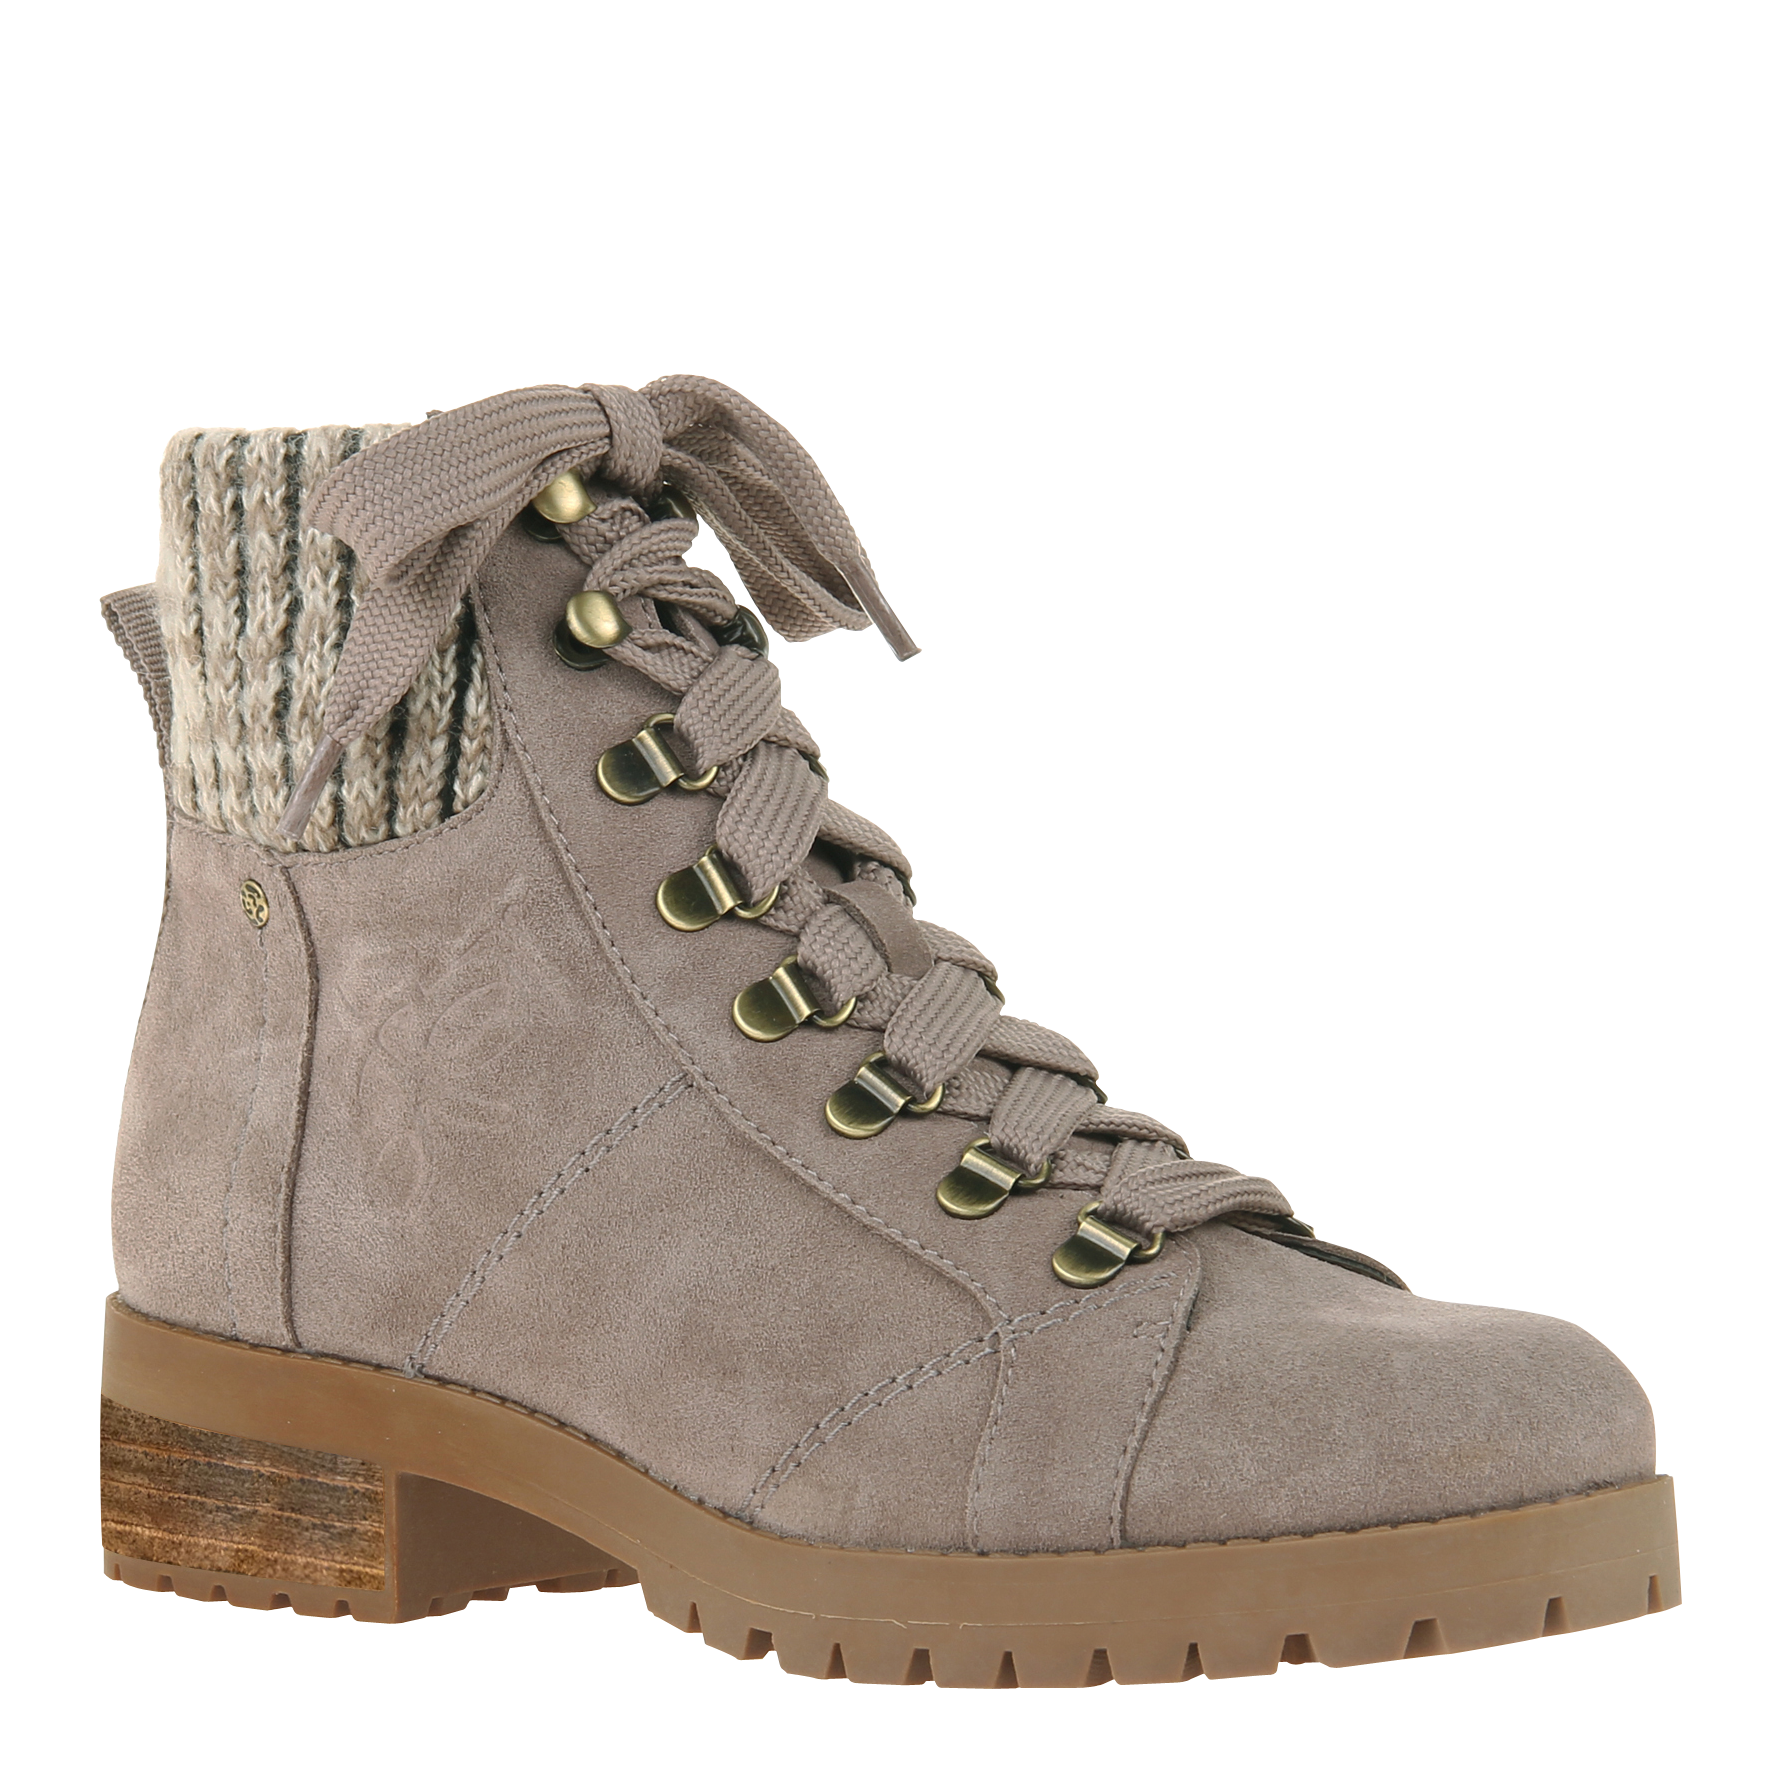 ankle hiking boots women's